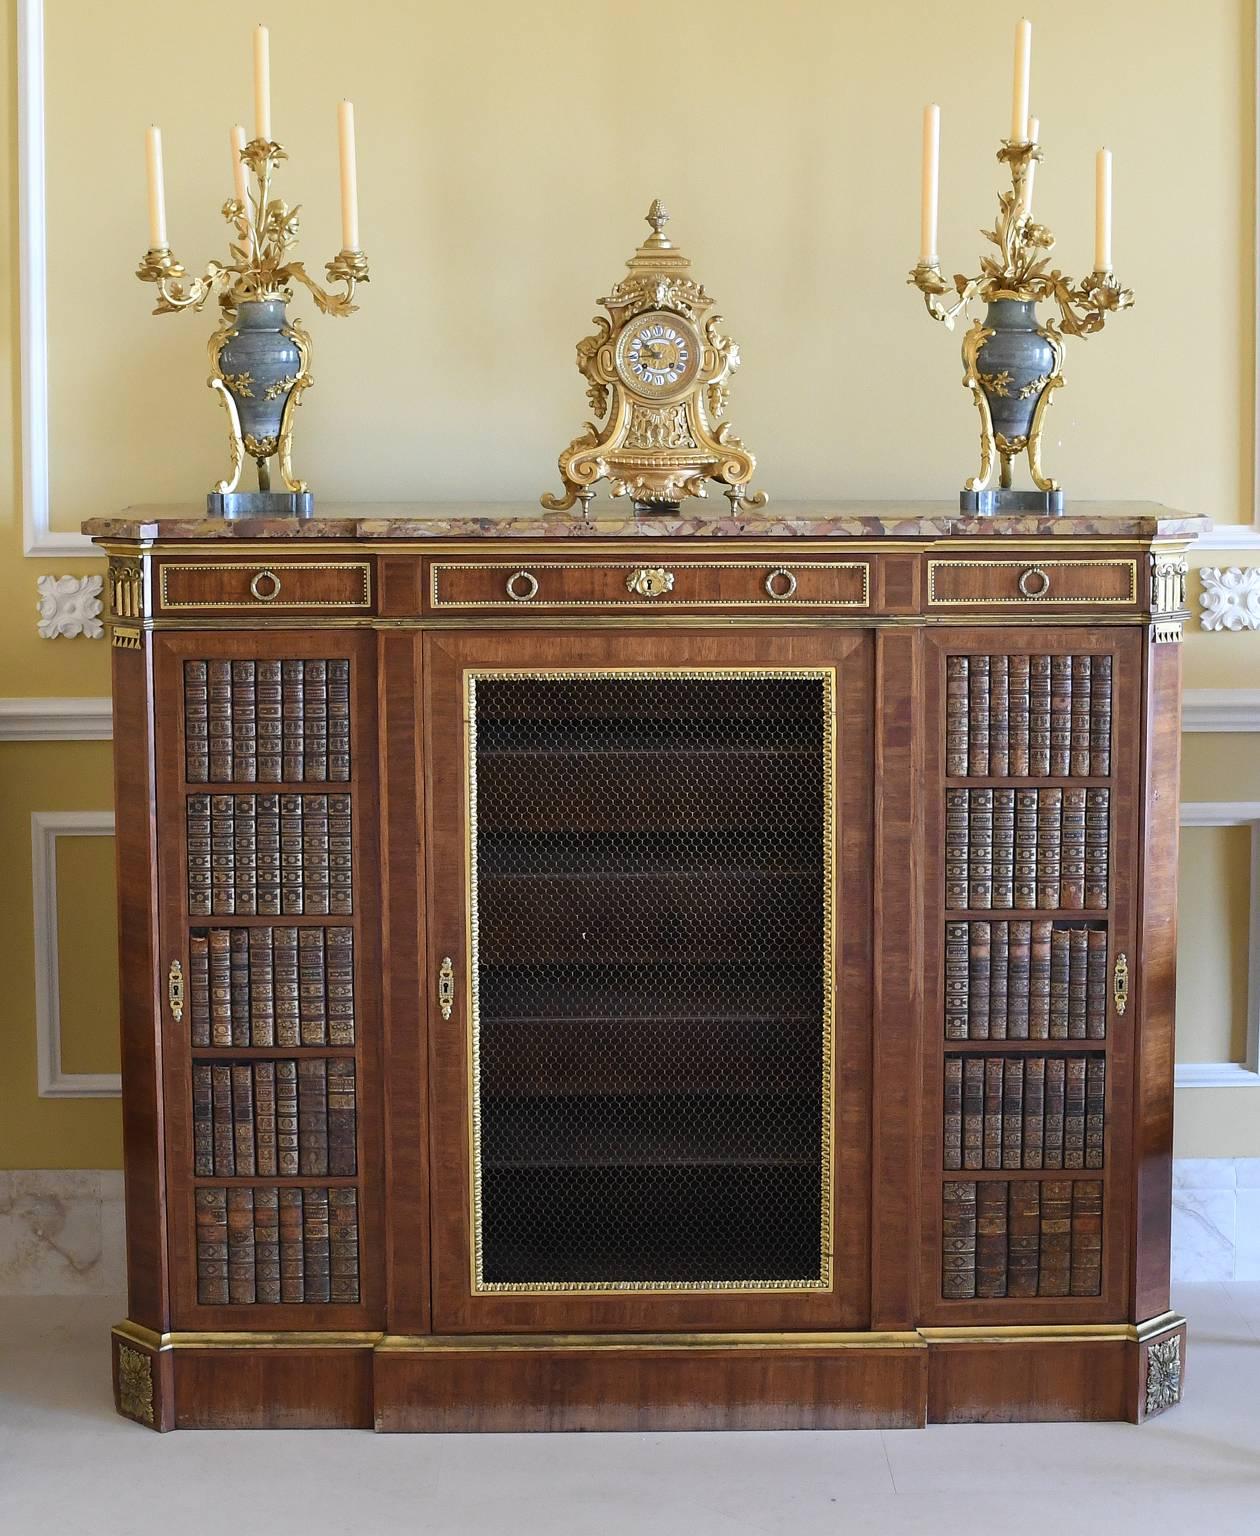 French Napoleon III Cabinet in Walnut with Ormolu in Louis XVI Style, France, c. 1850 For Sale